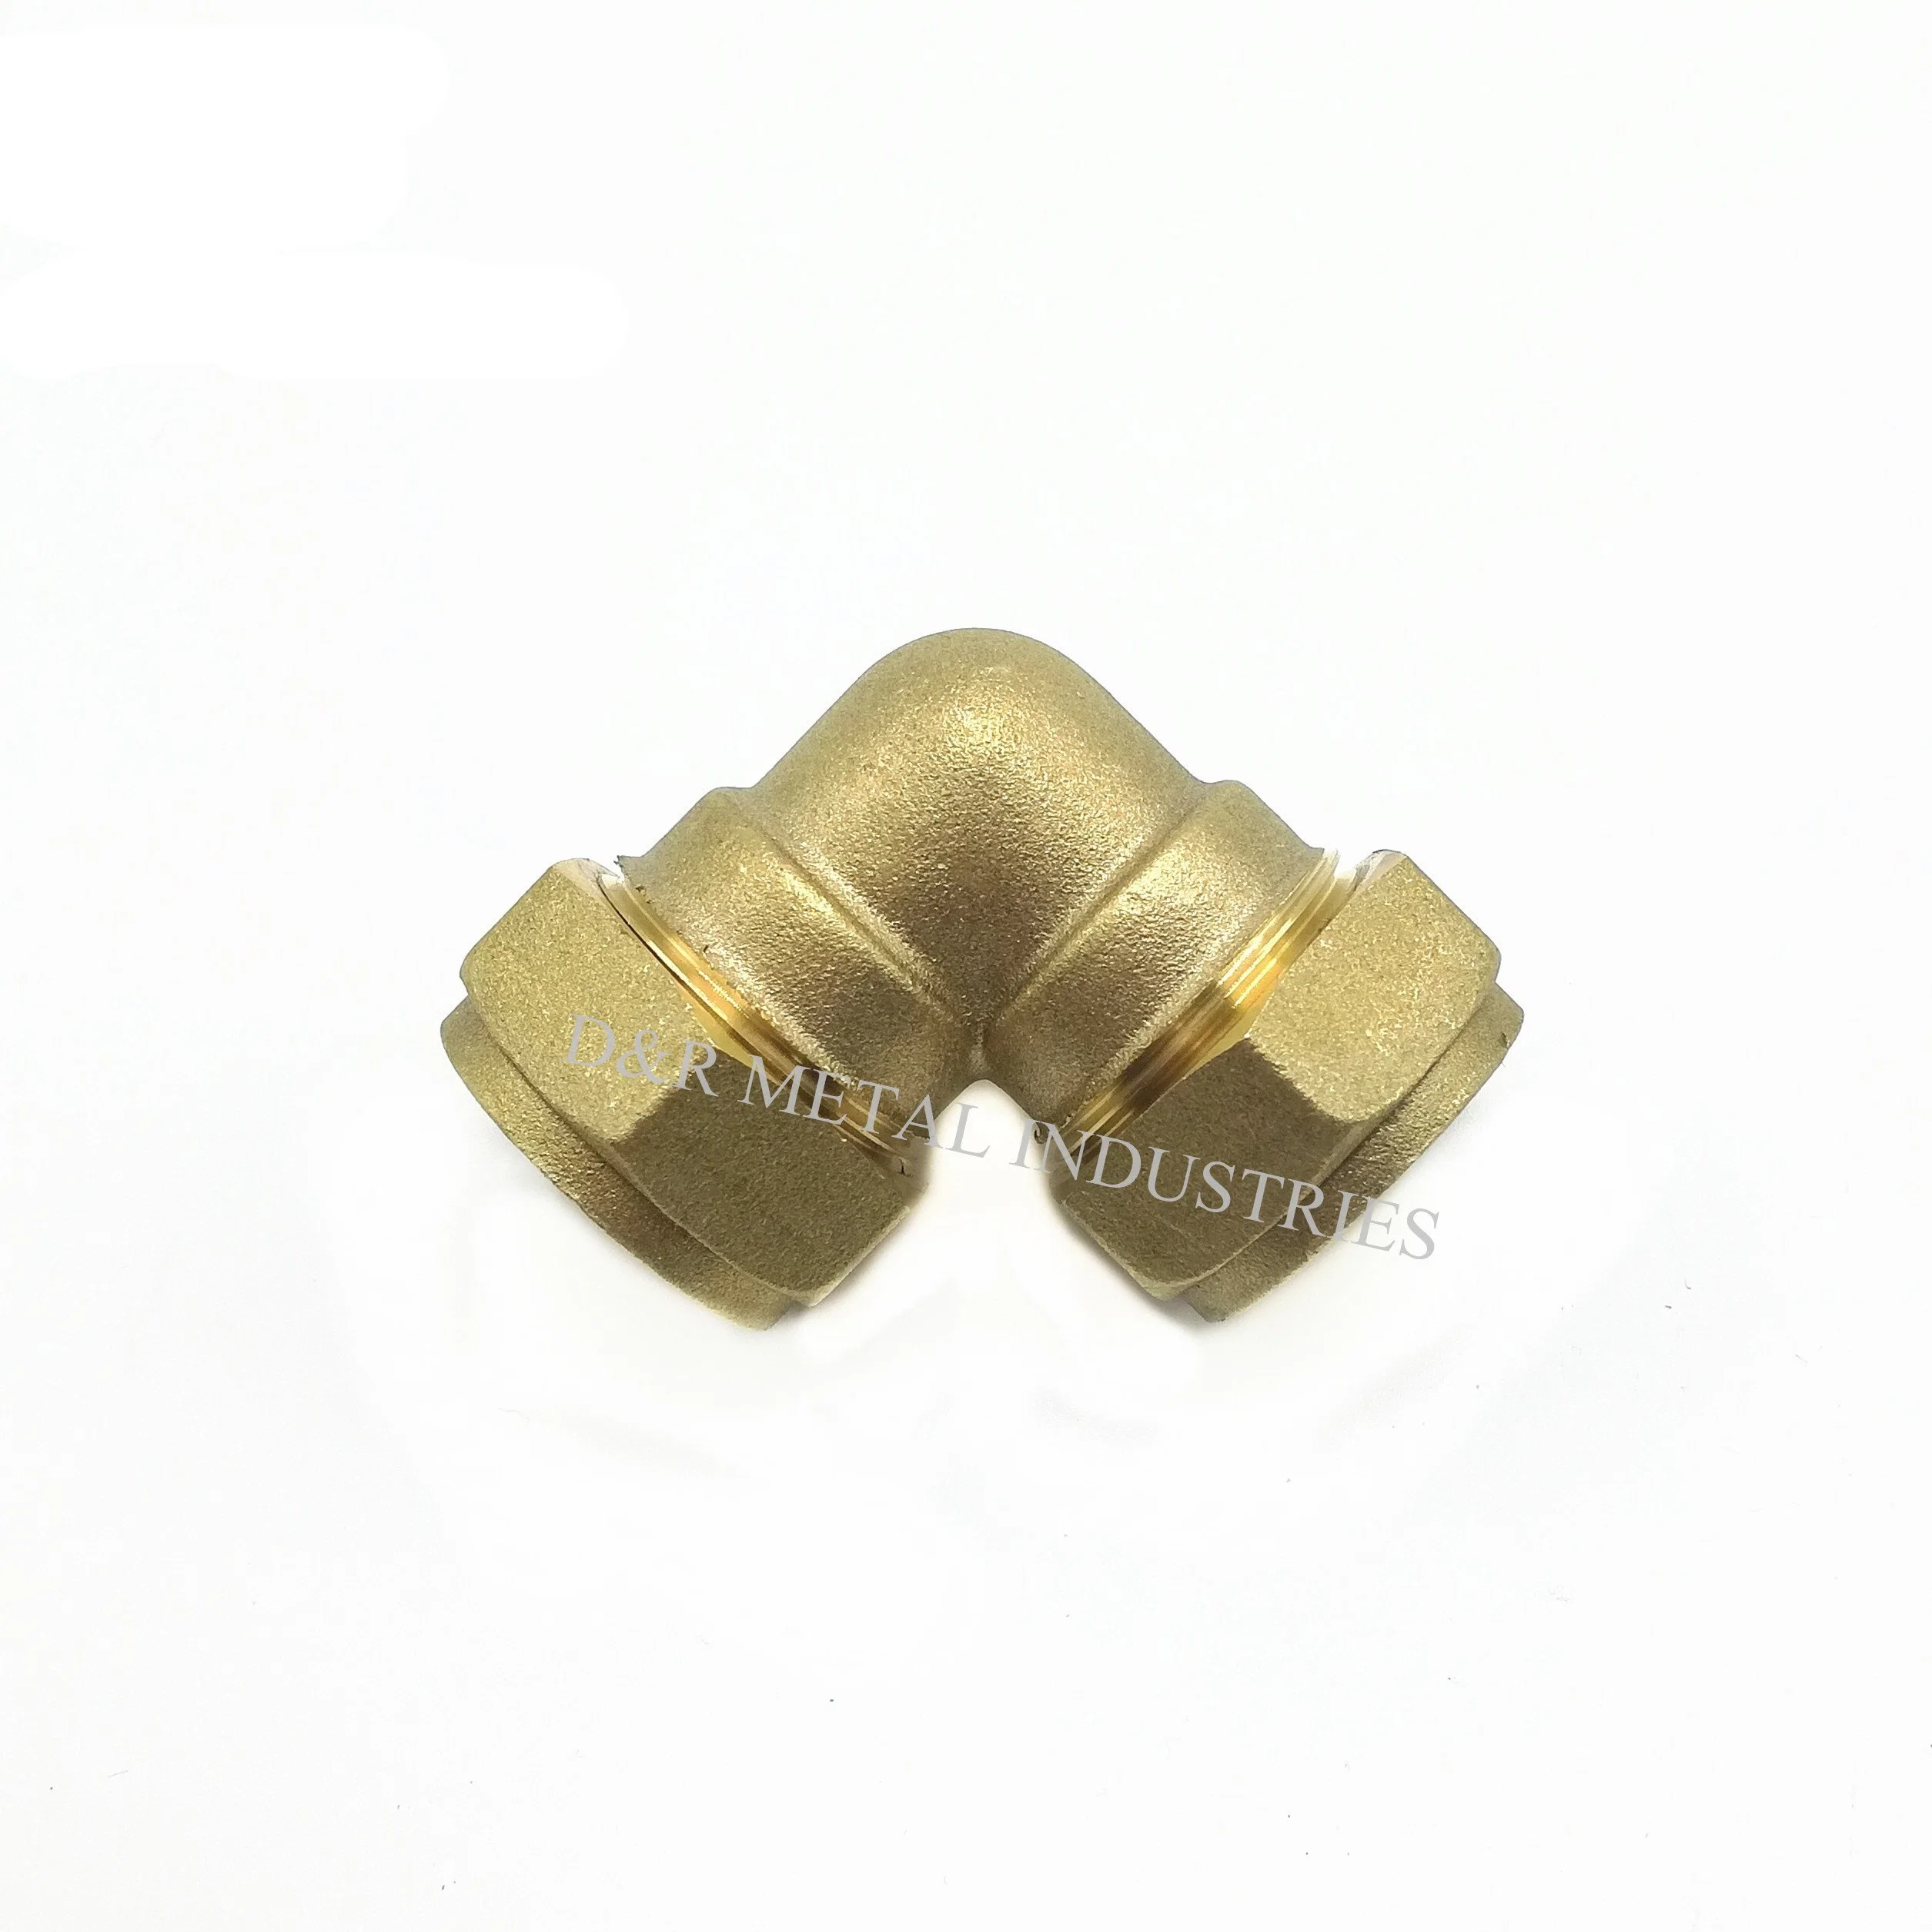 Brass Pipe Fitting Elbow Connector, Copper Pipe